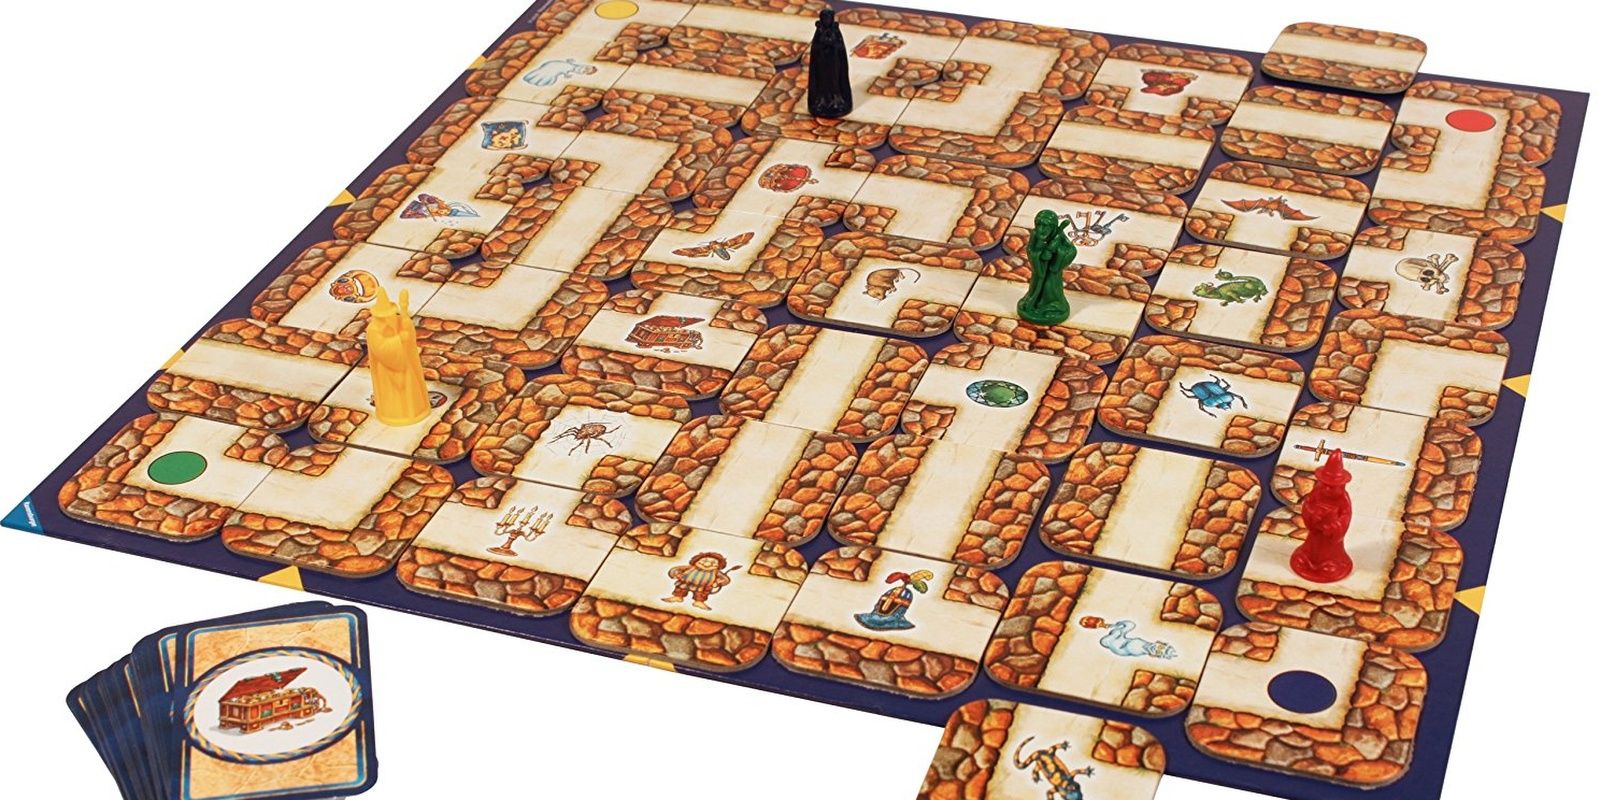 Labyrinth Board Game Setup On The Table